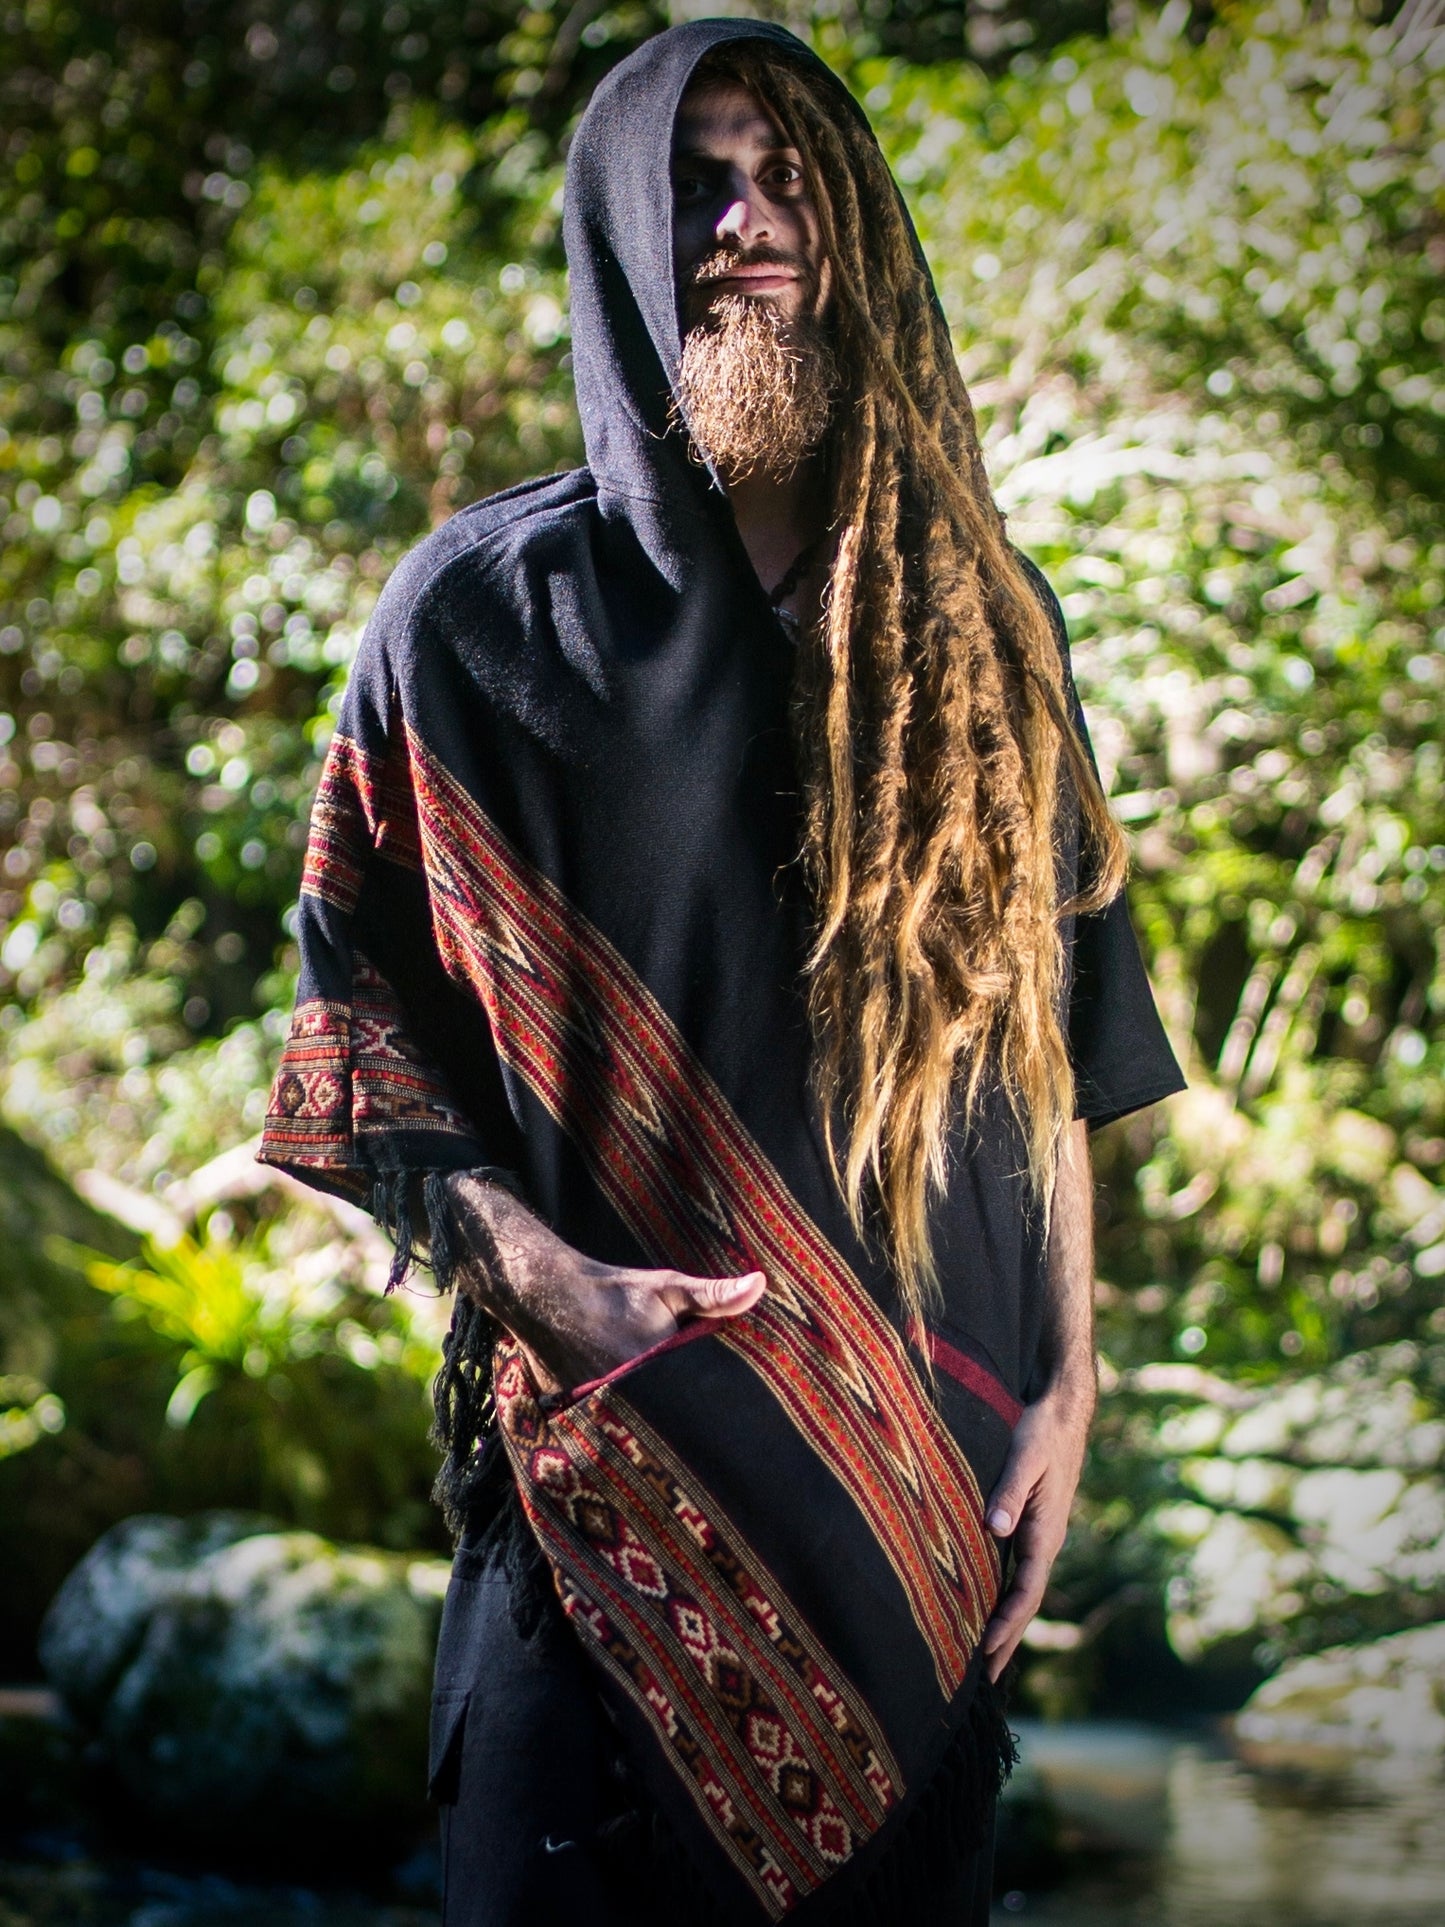 Mens Black Poncho Yak Wool Handmade with Large Hood and pockets, Earthy Tribal Pattern